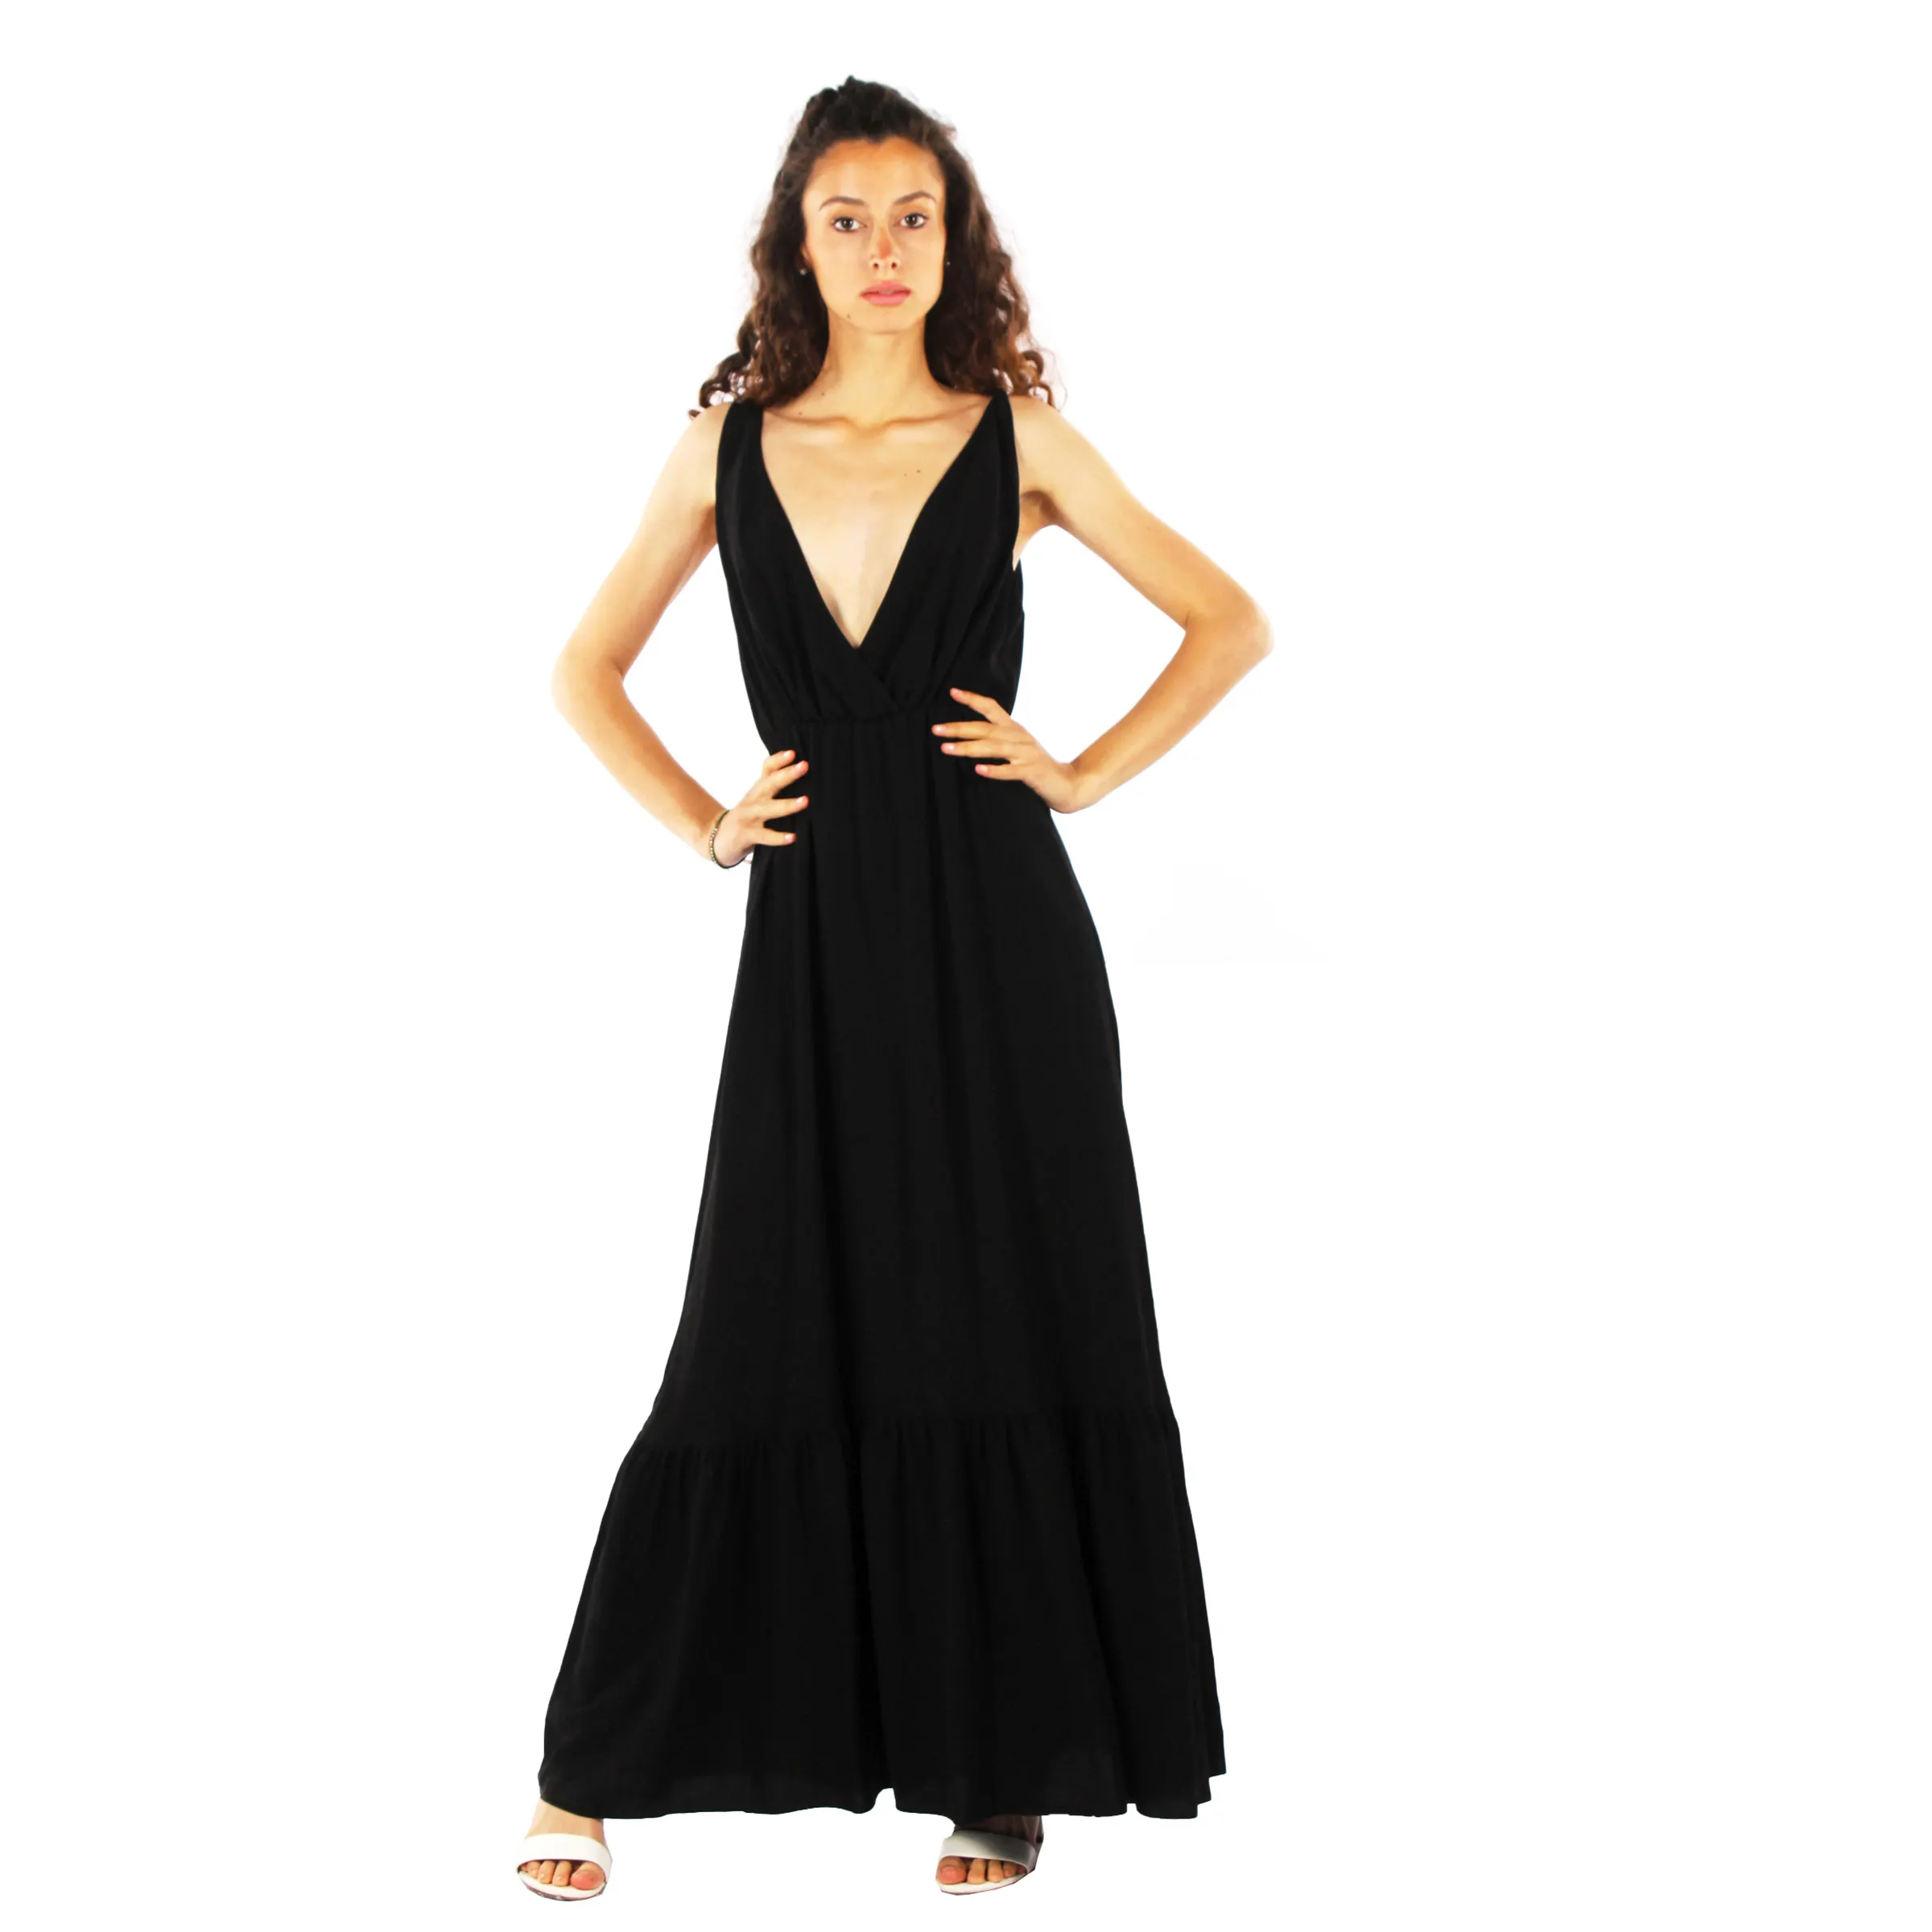 Stylish Black Long Dress V-Neck Gown with Flowy Ruffles Luxurious Viscose Linen Elegance and Versatility size small